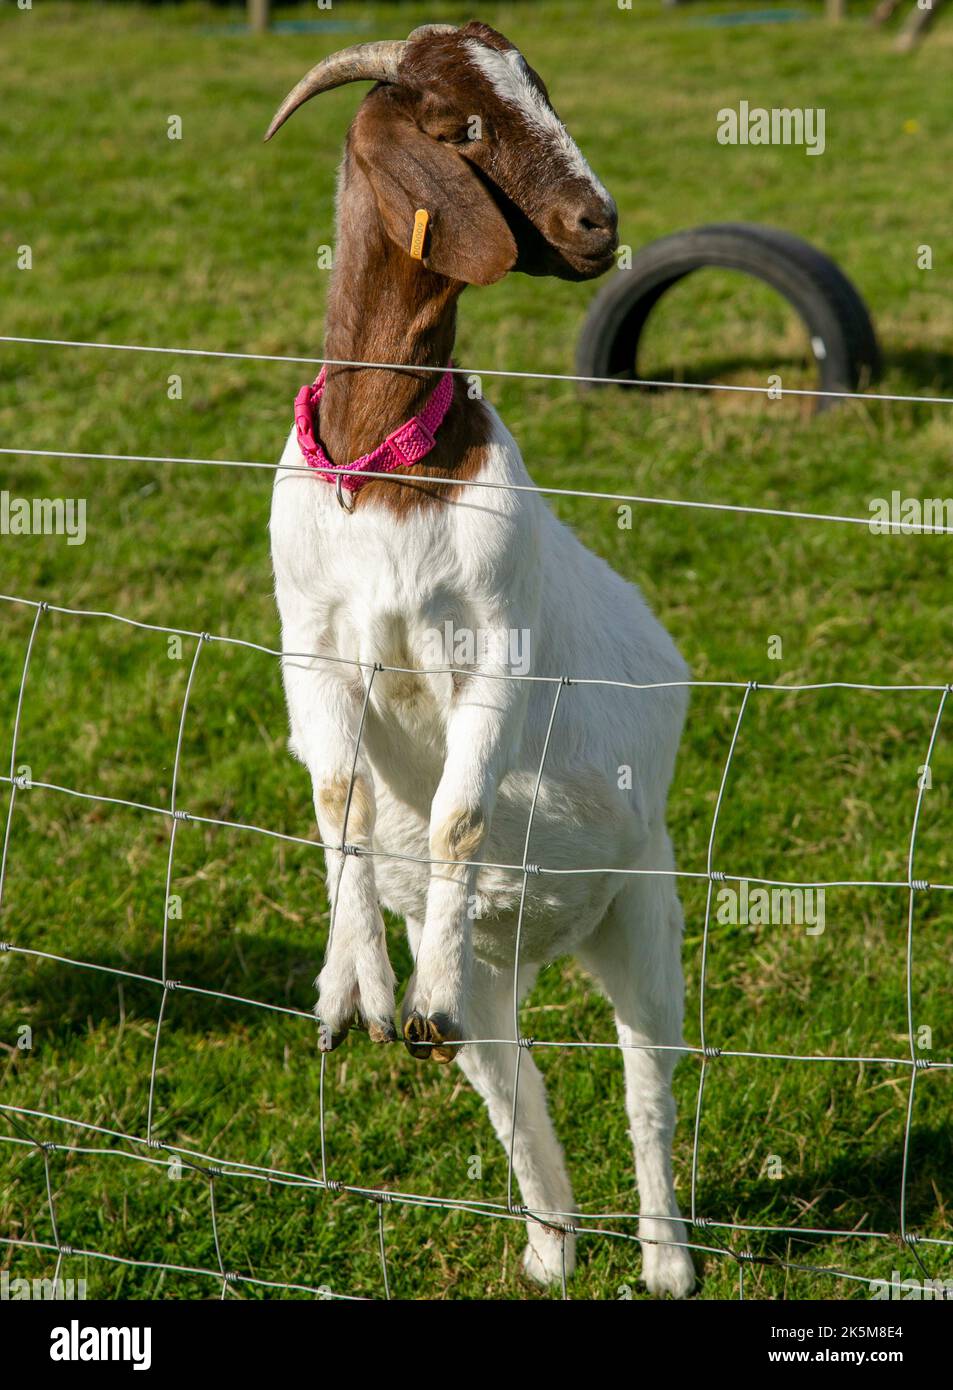 A pygmy goat stand up to peer over a wire fence Stock Photo